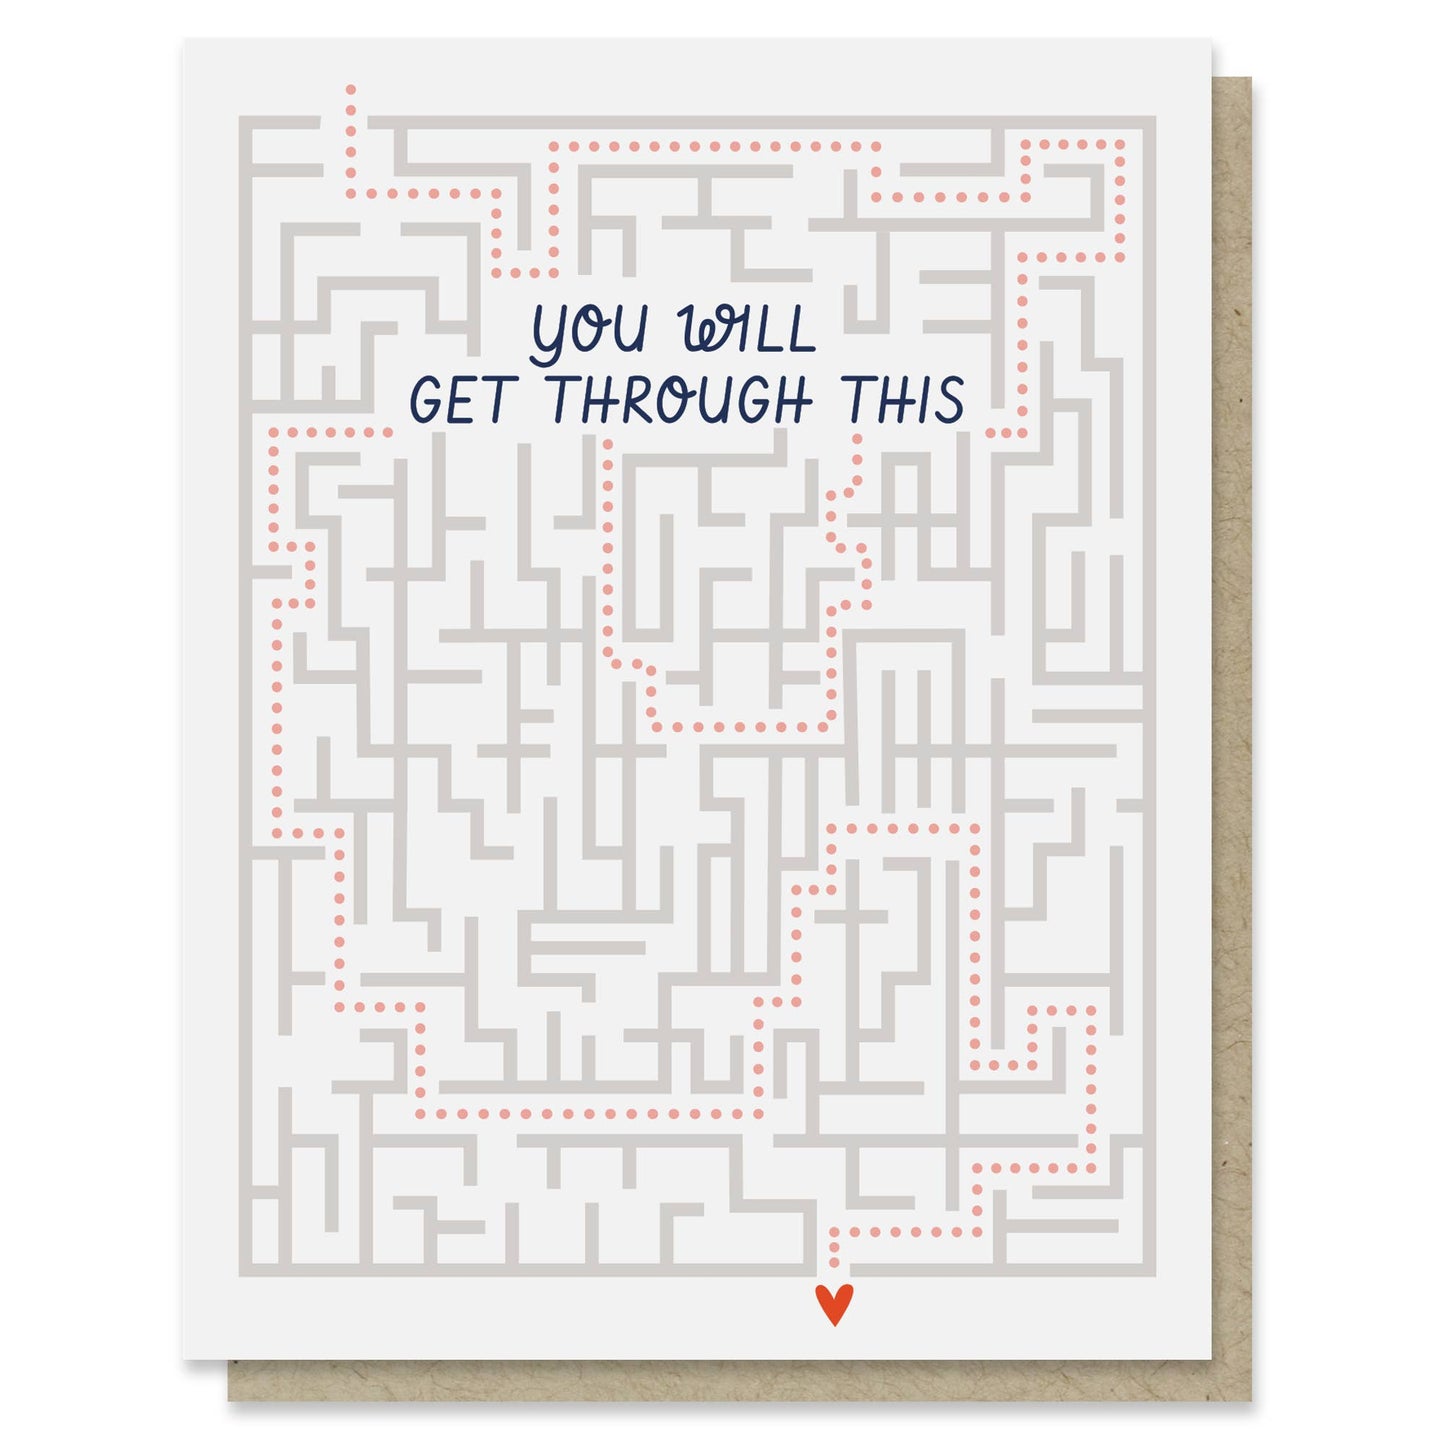 Paper Parasol Press - Get Through This Maze Sympathy Card -  - Stomping Grounds